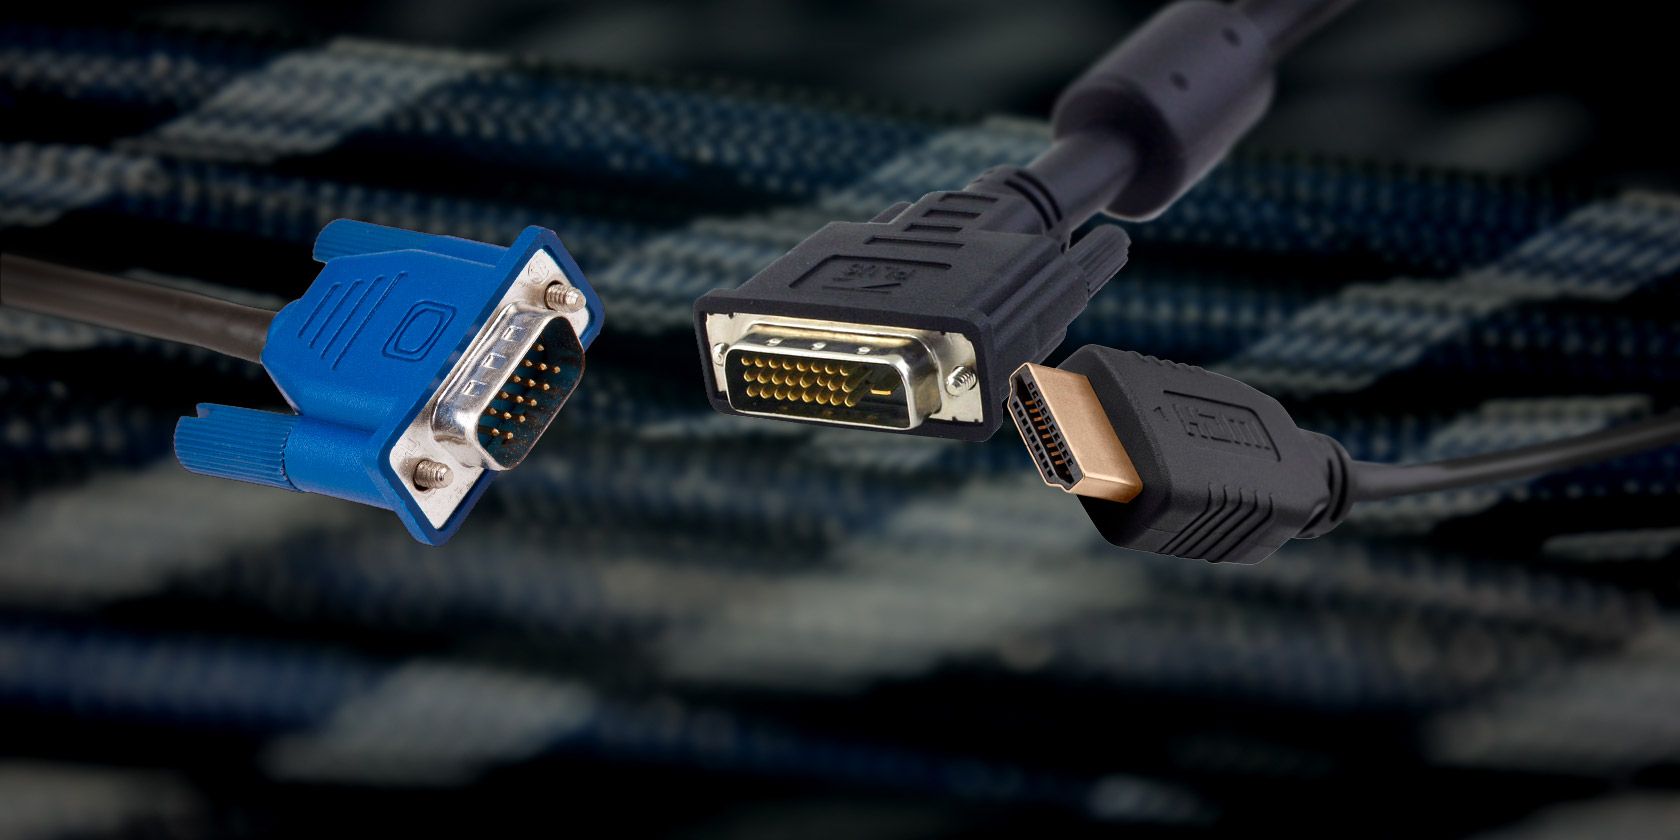 Diplomati fysisk eftertænksom Video Cable Types Explained: Differences Between VGA, DVI, and HDMI Ports